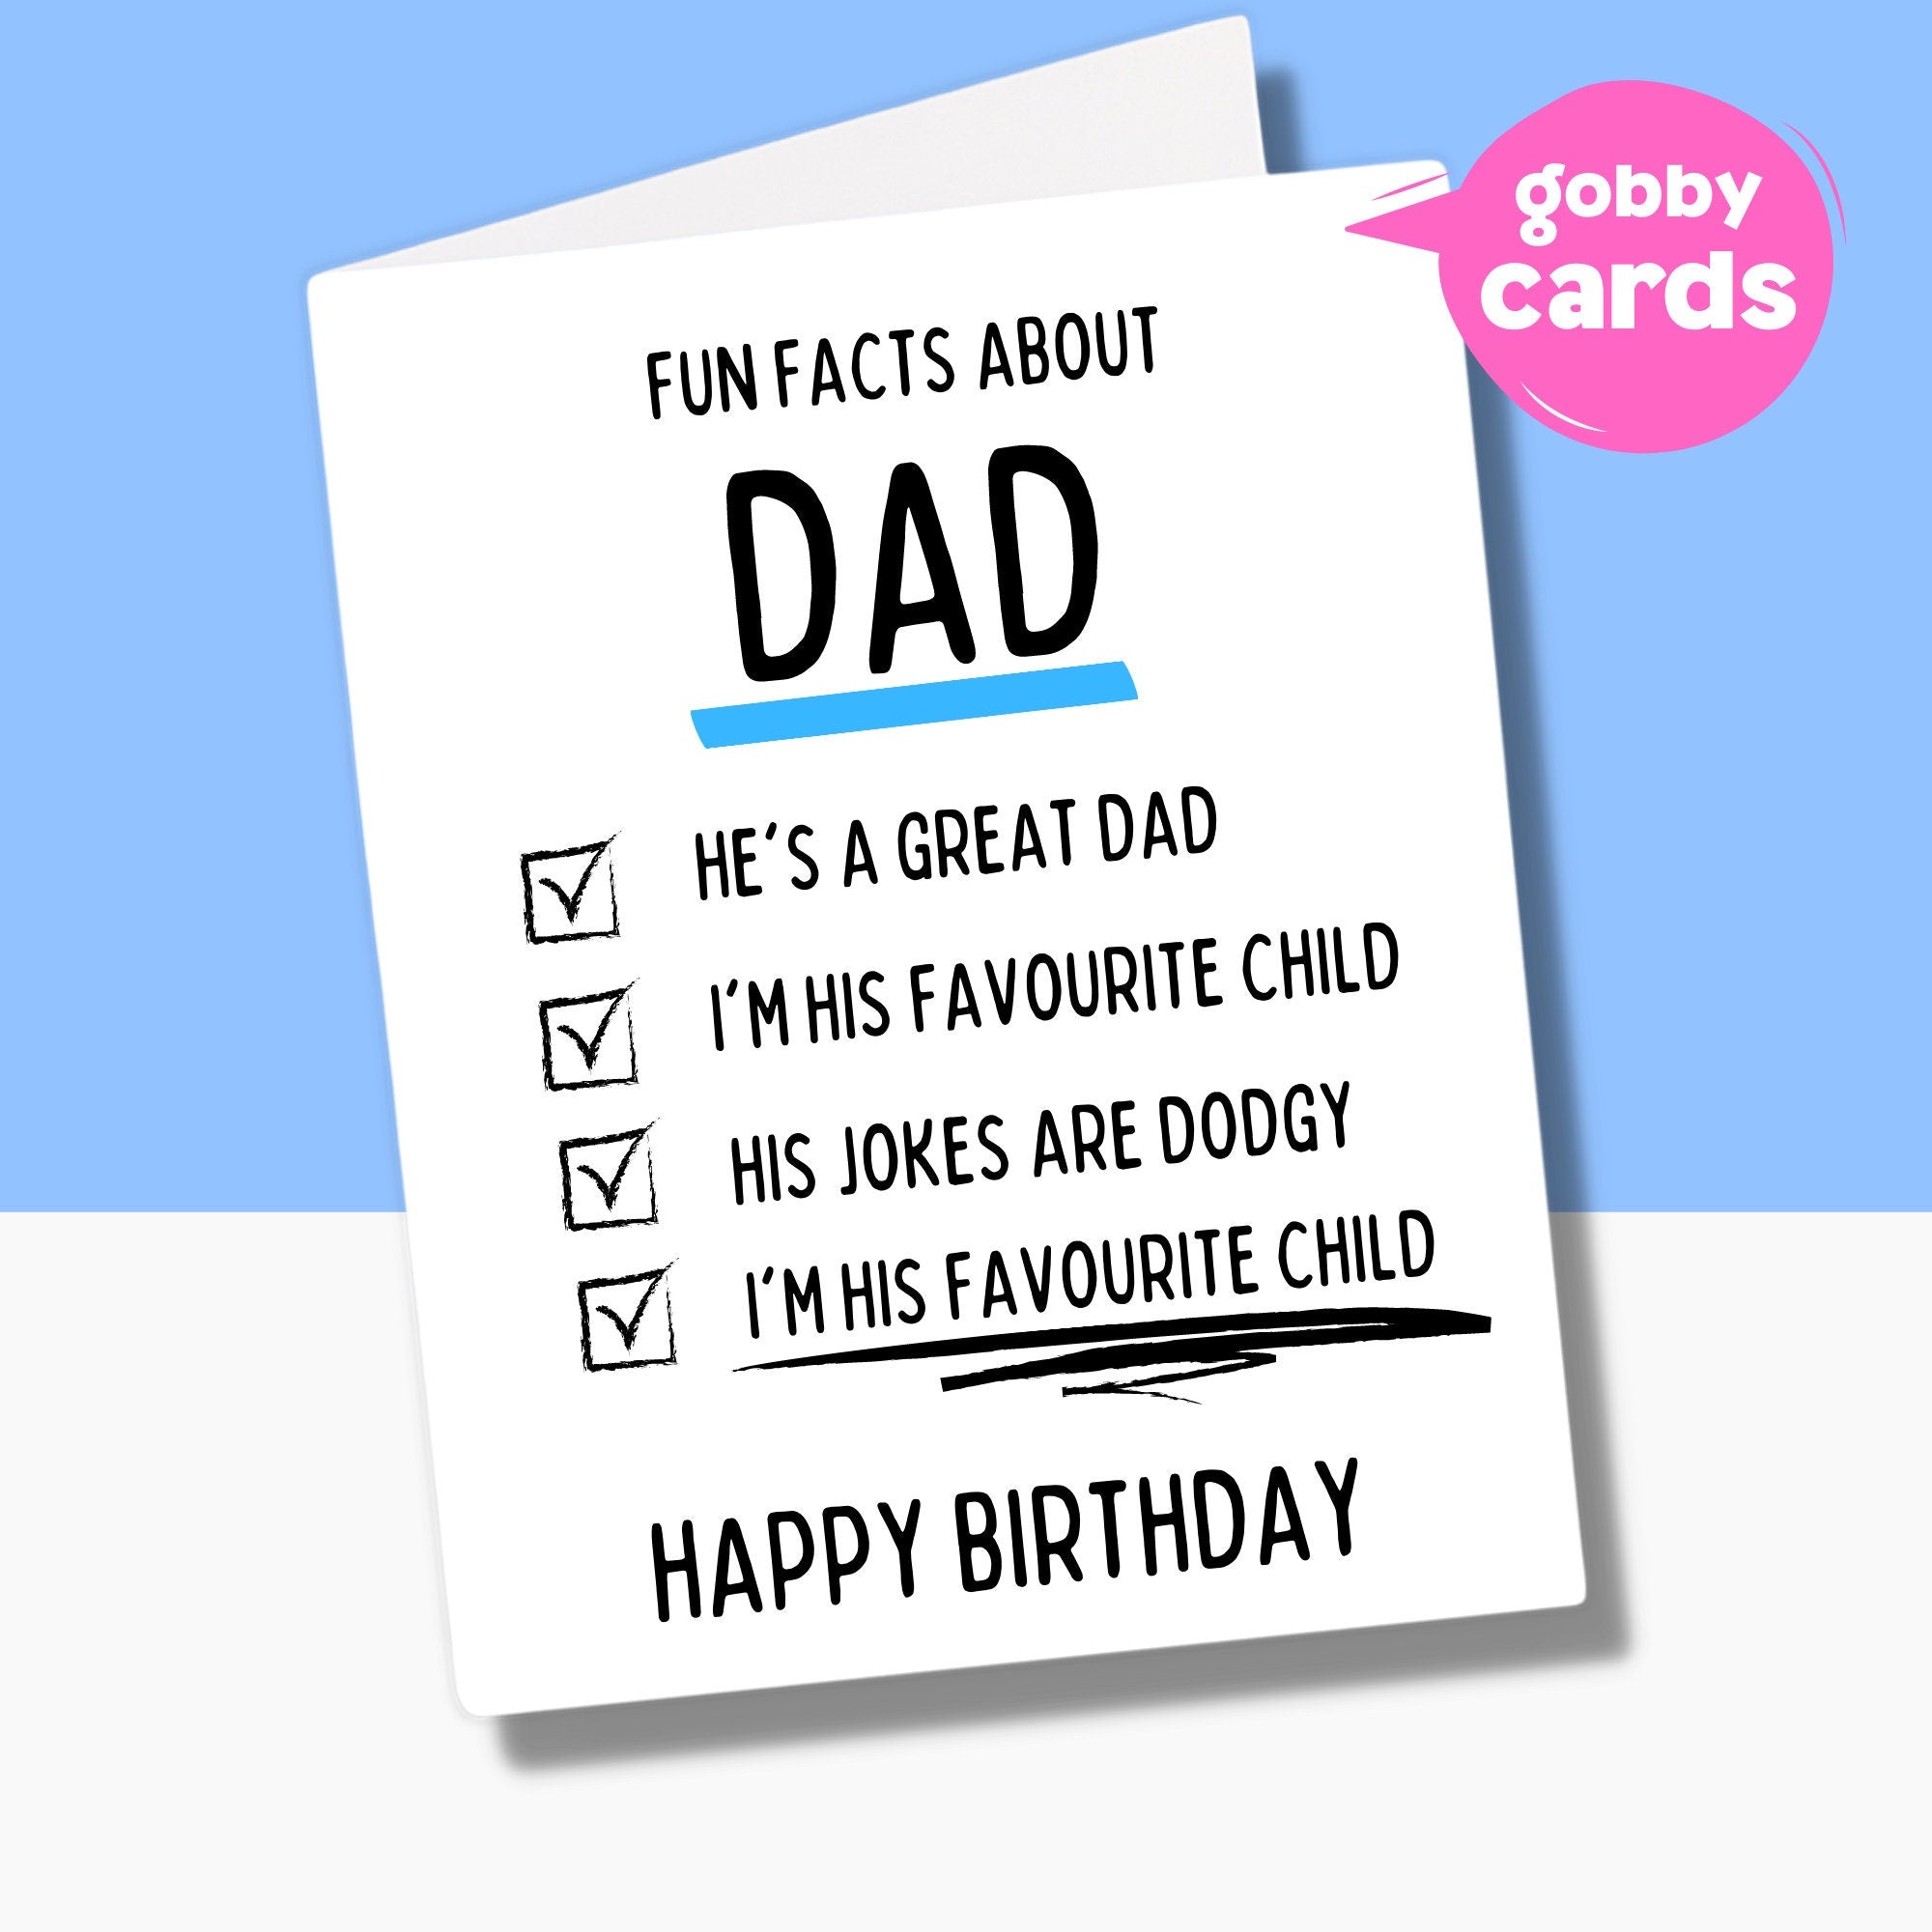 Funny Dad Birthday Card, Dad Birthday Card From Favourite Child, Rude Birthday Card For Dad